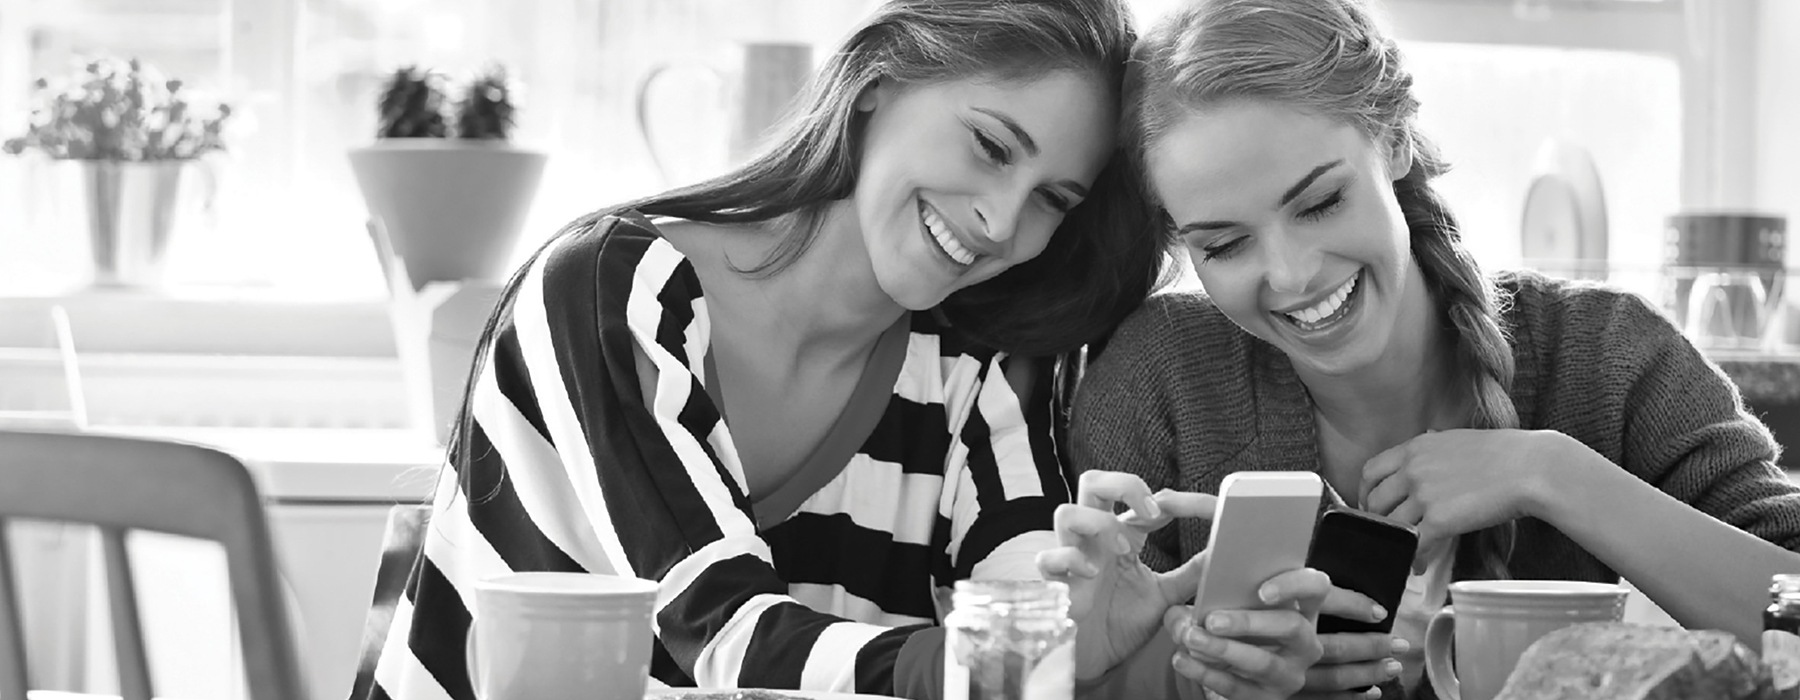 lifestyle image of two women interacting with their phone